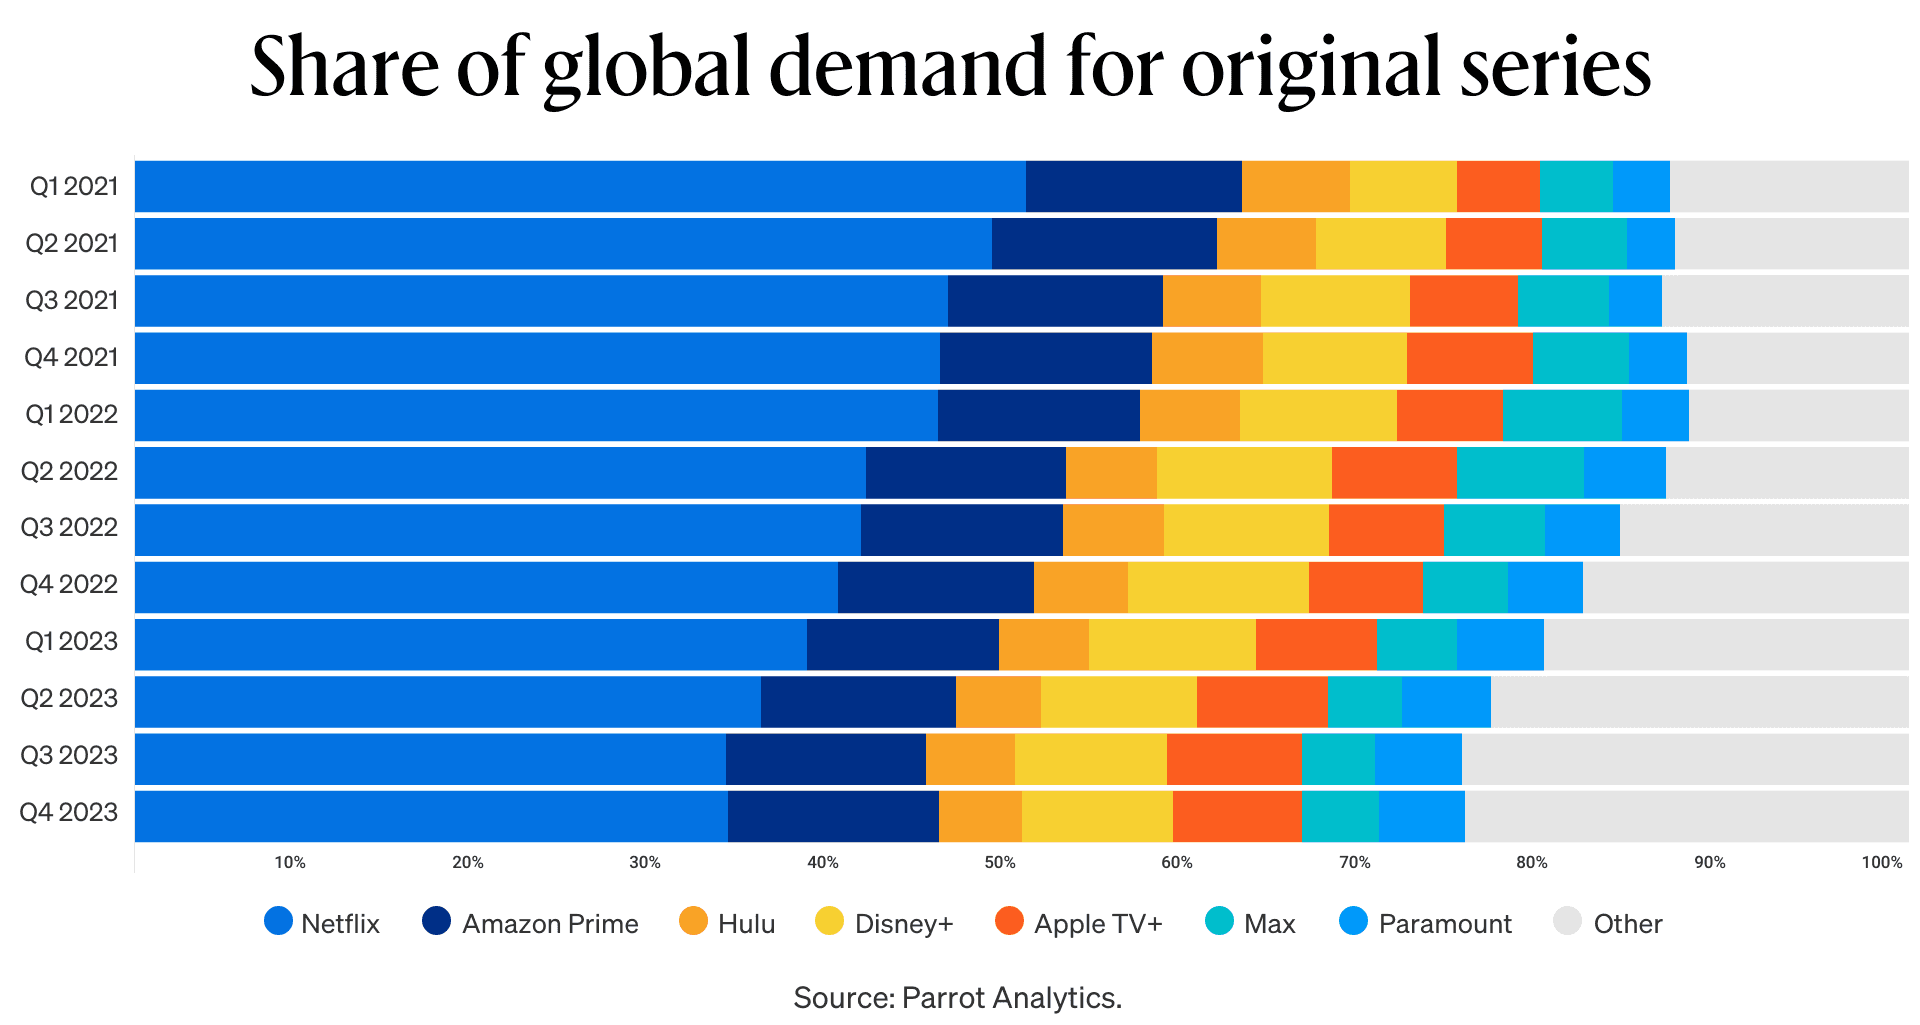 The Readout graph: Share of global demand for original series comparing Netflix, Amazon Prime, Hulu, Disney+, Apple TV+, Max, Paramount, Other.